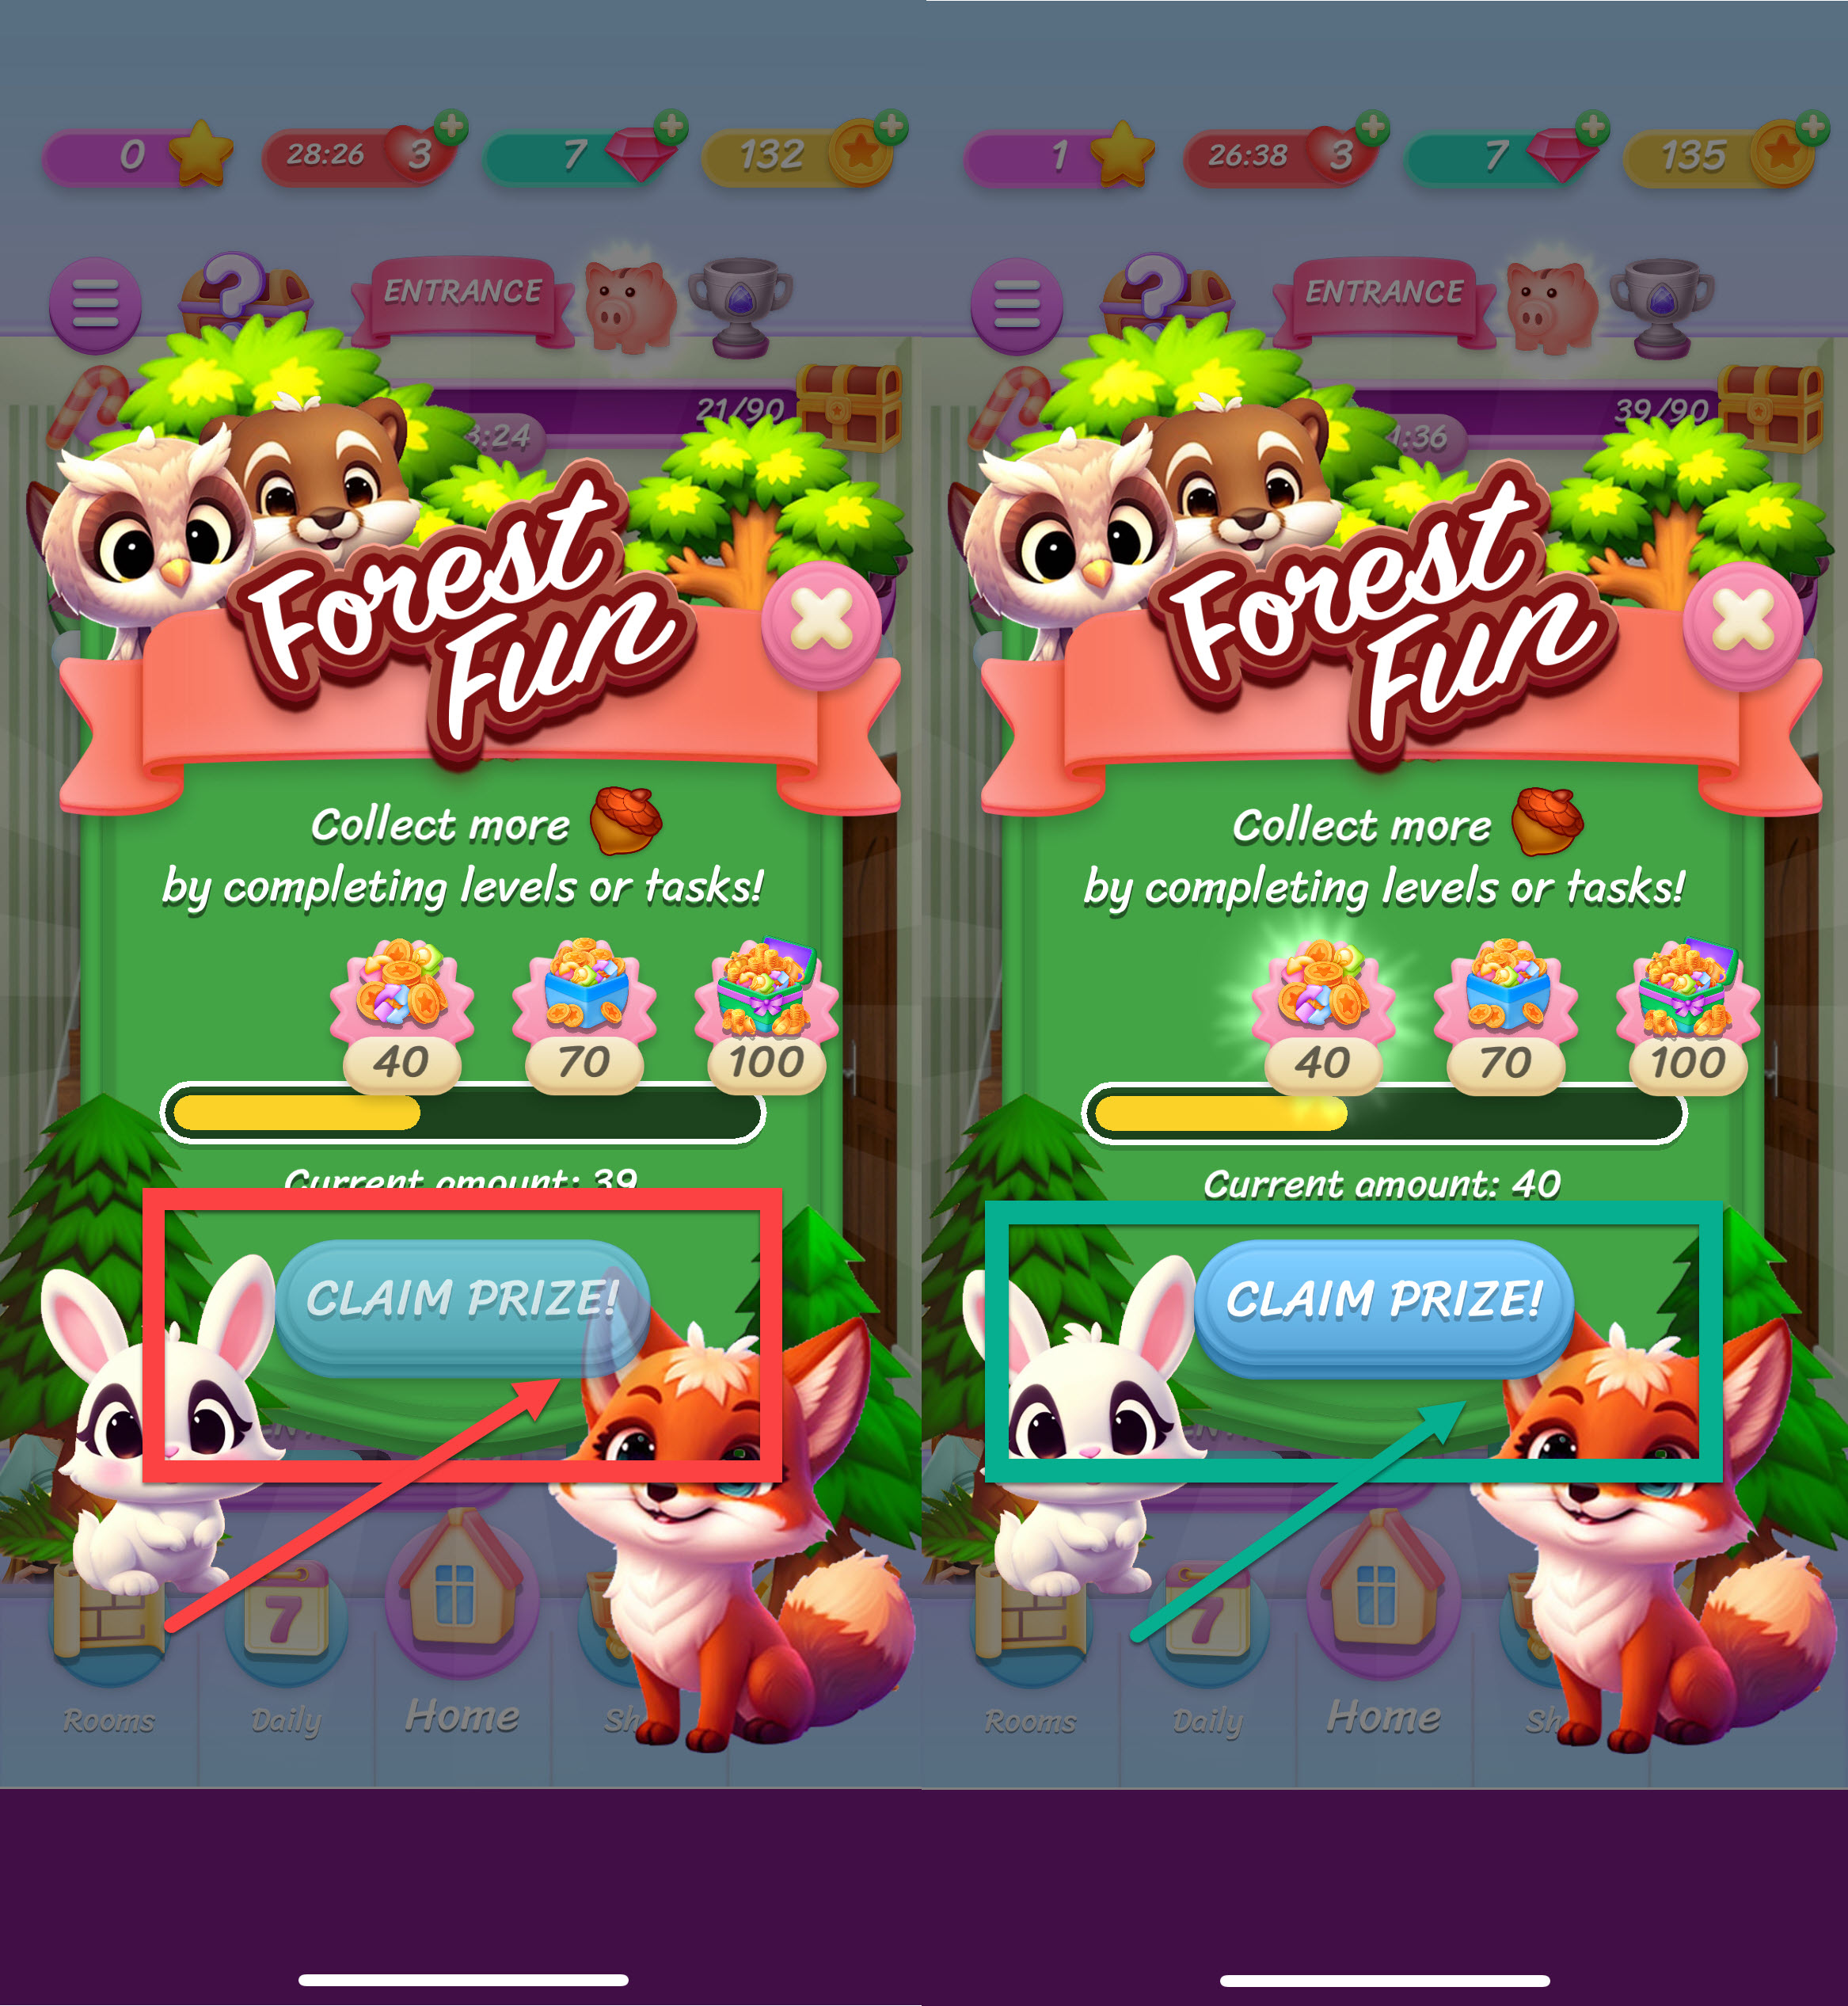 Transparent Claim Prize! button on Forest Fun banner